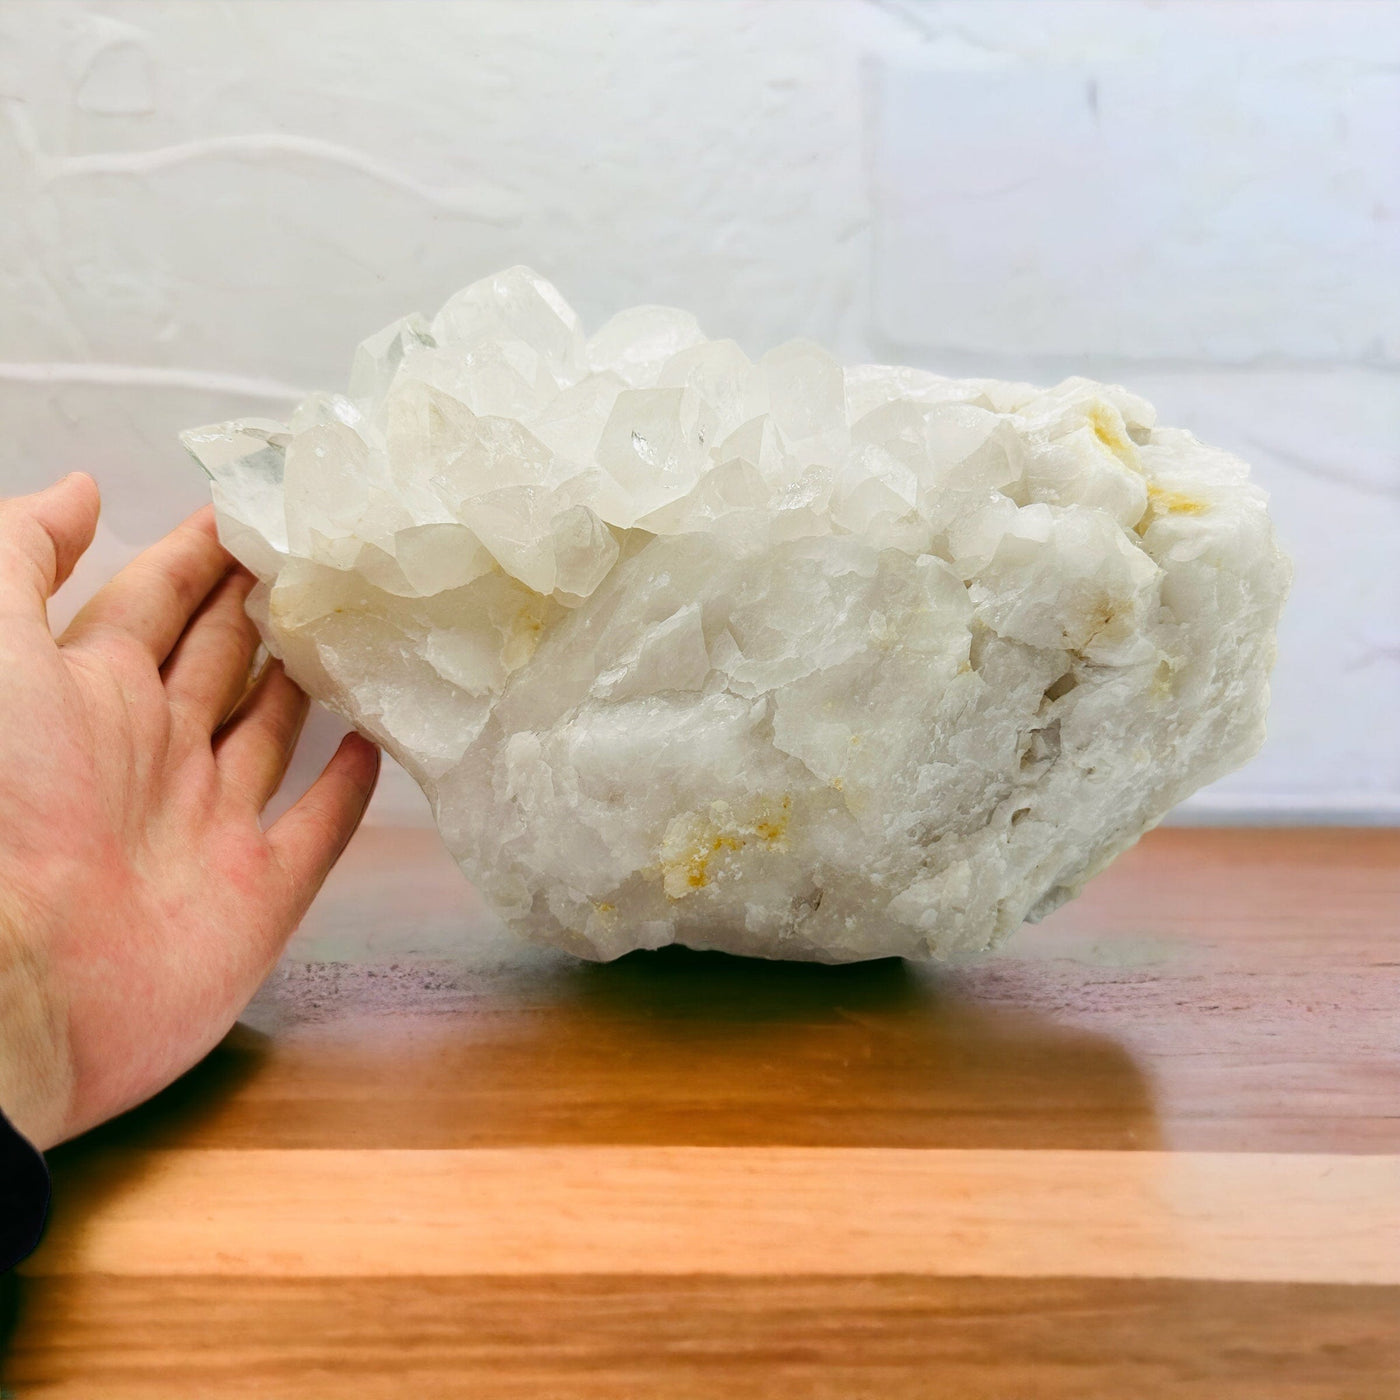 hand next to crystal quartz cluster on a table